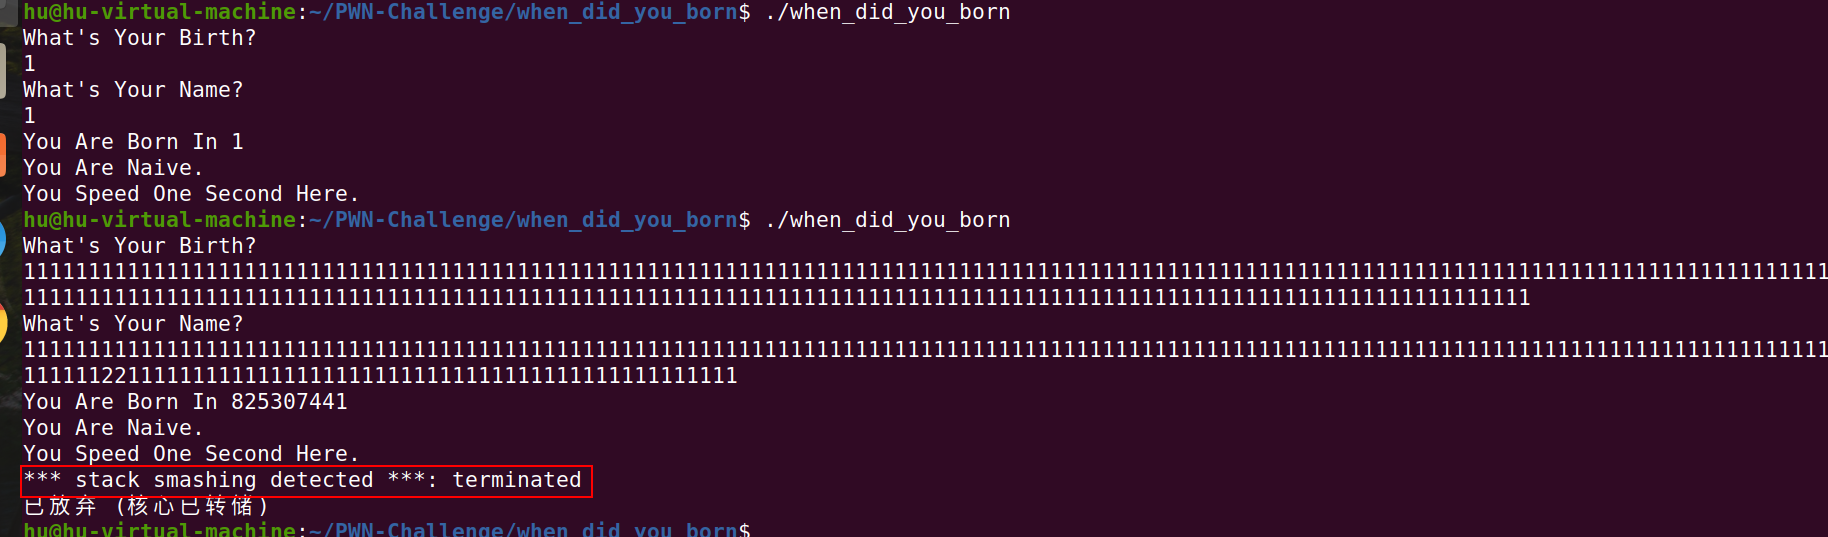 XCTF when_did_you_born